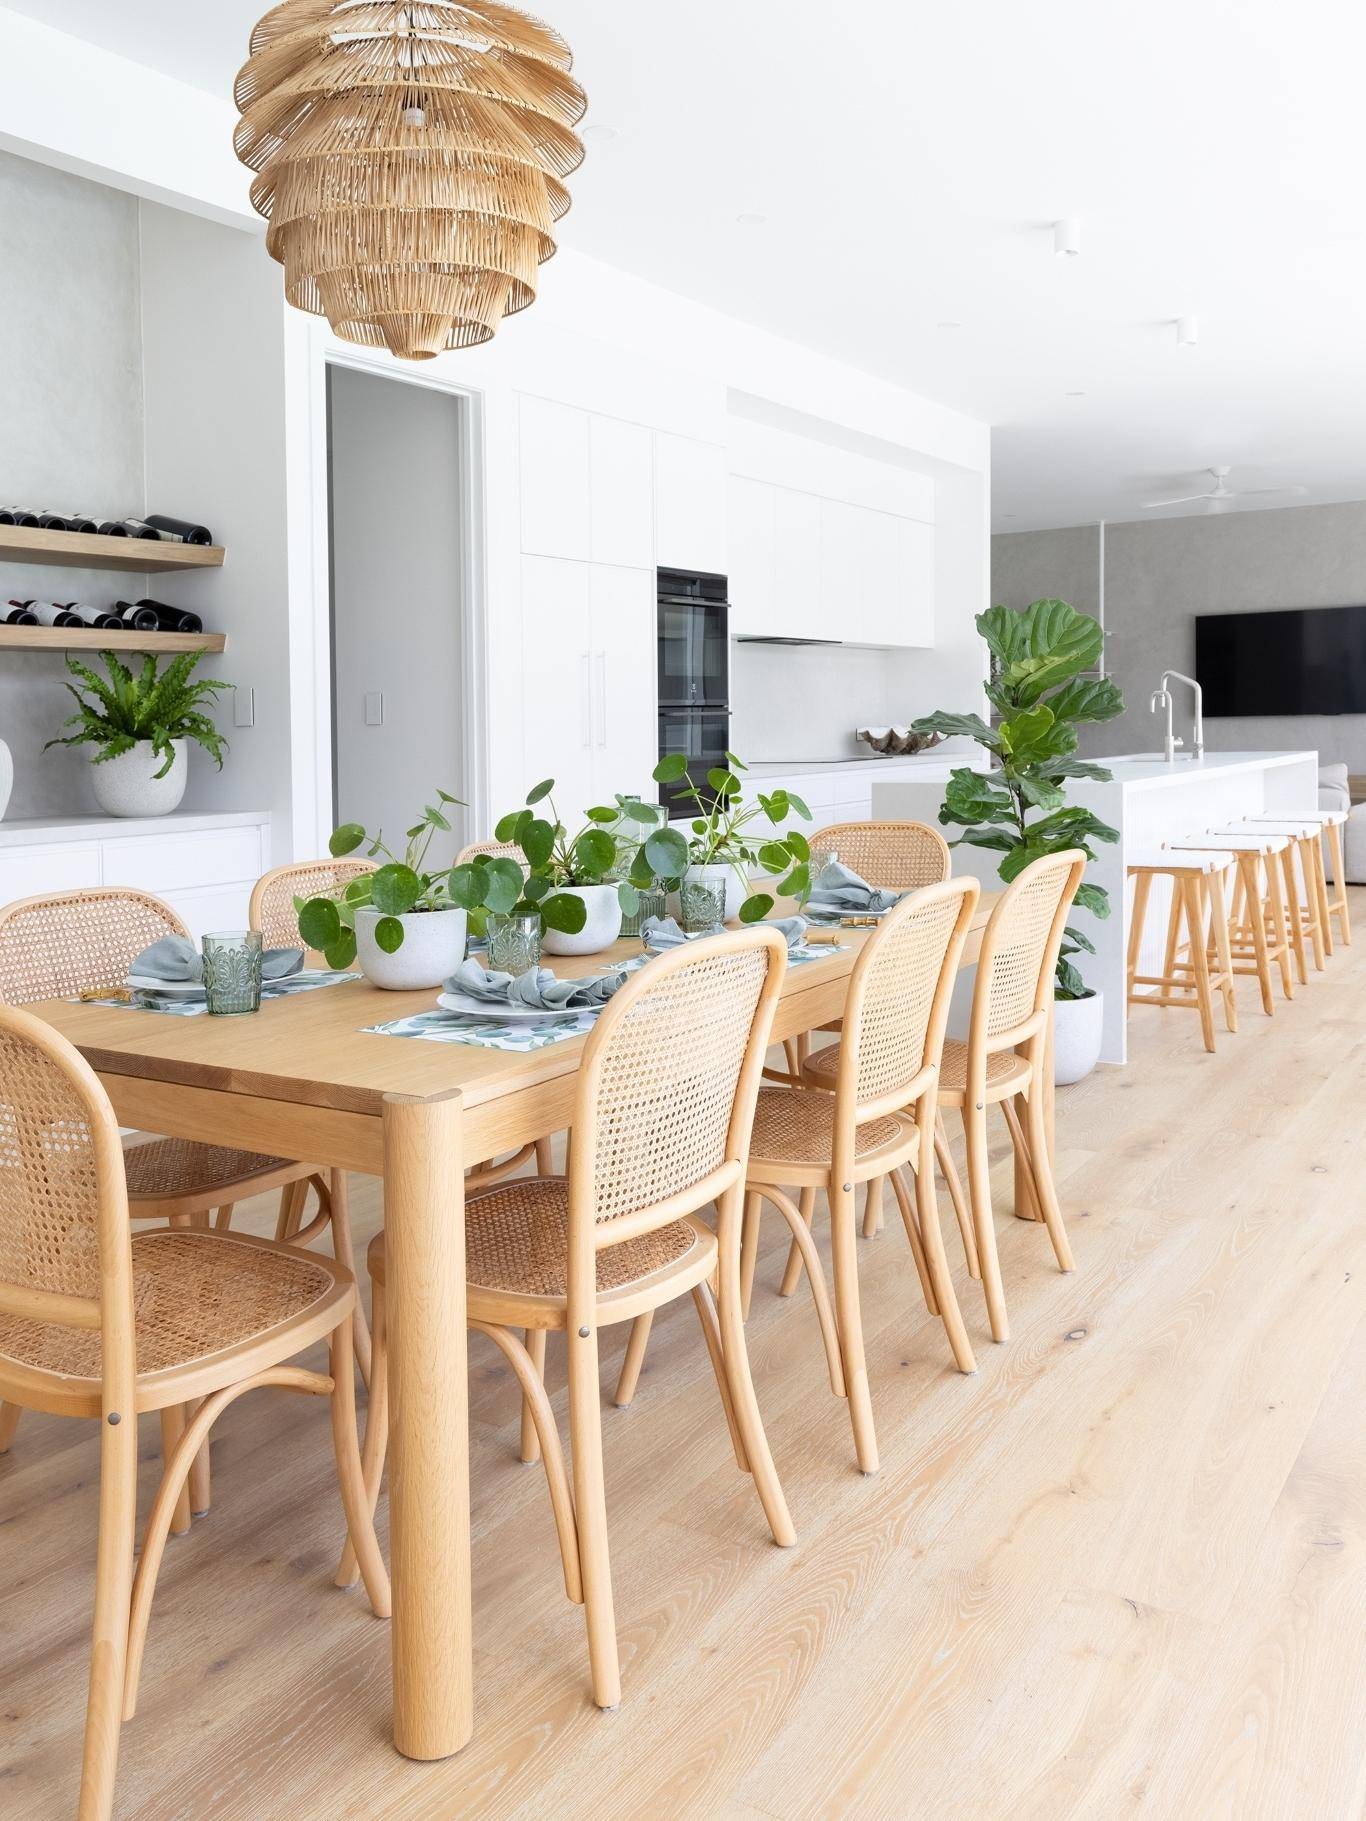 Indoor Plants styled nicely in a kitchen and dining room area with timber table and chairs